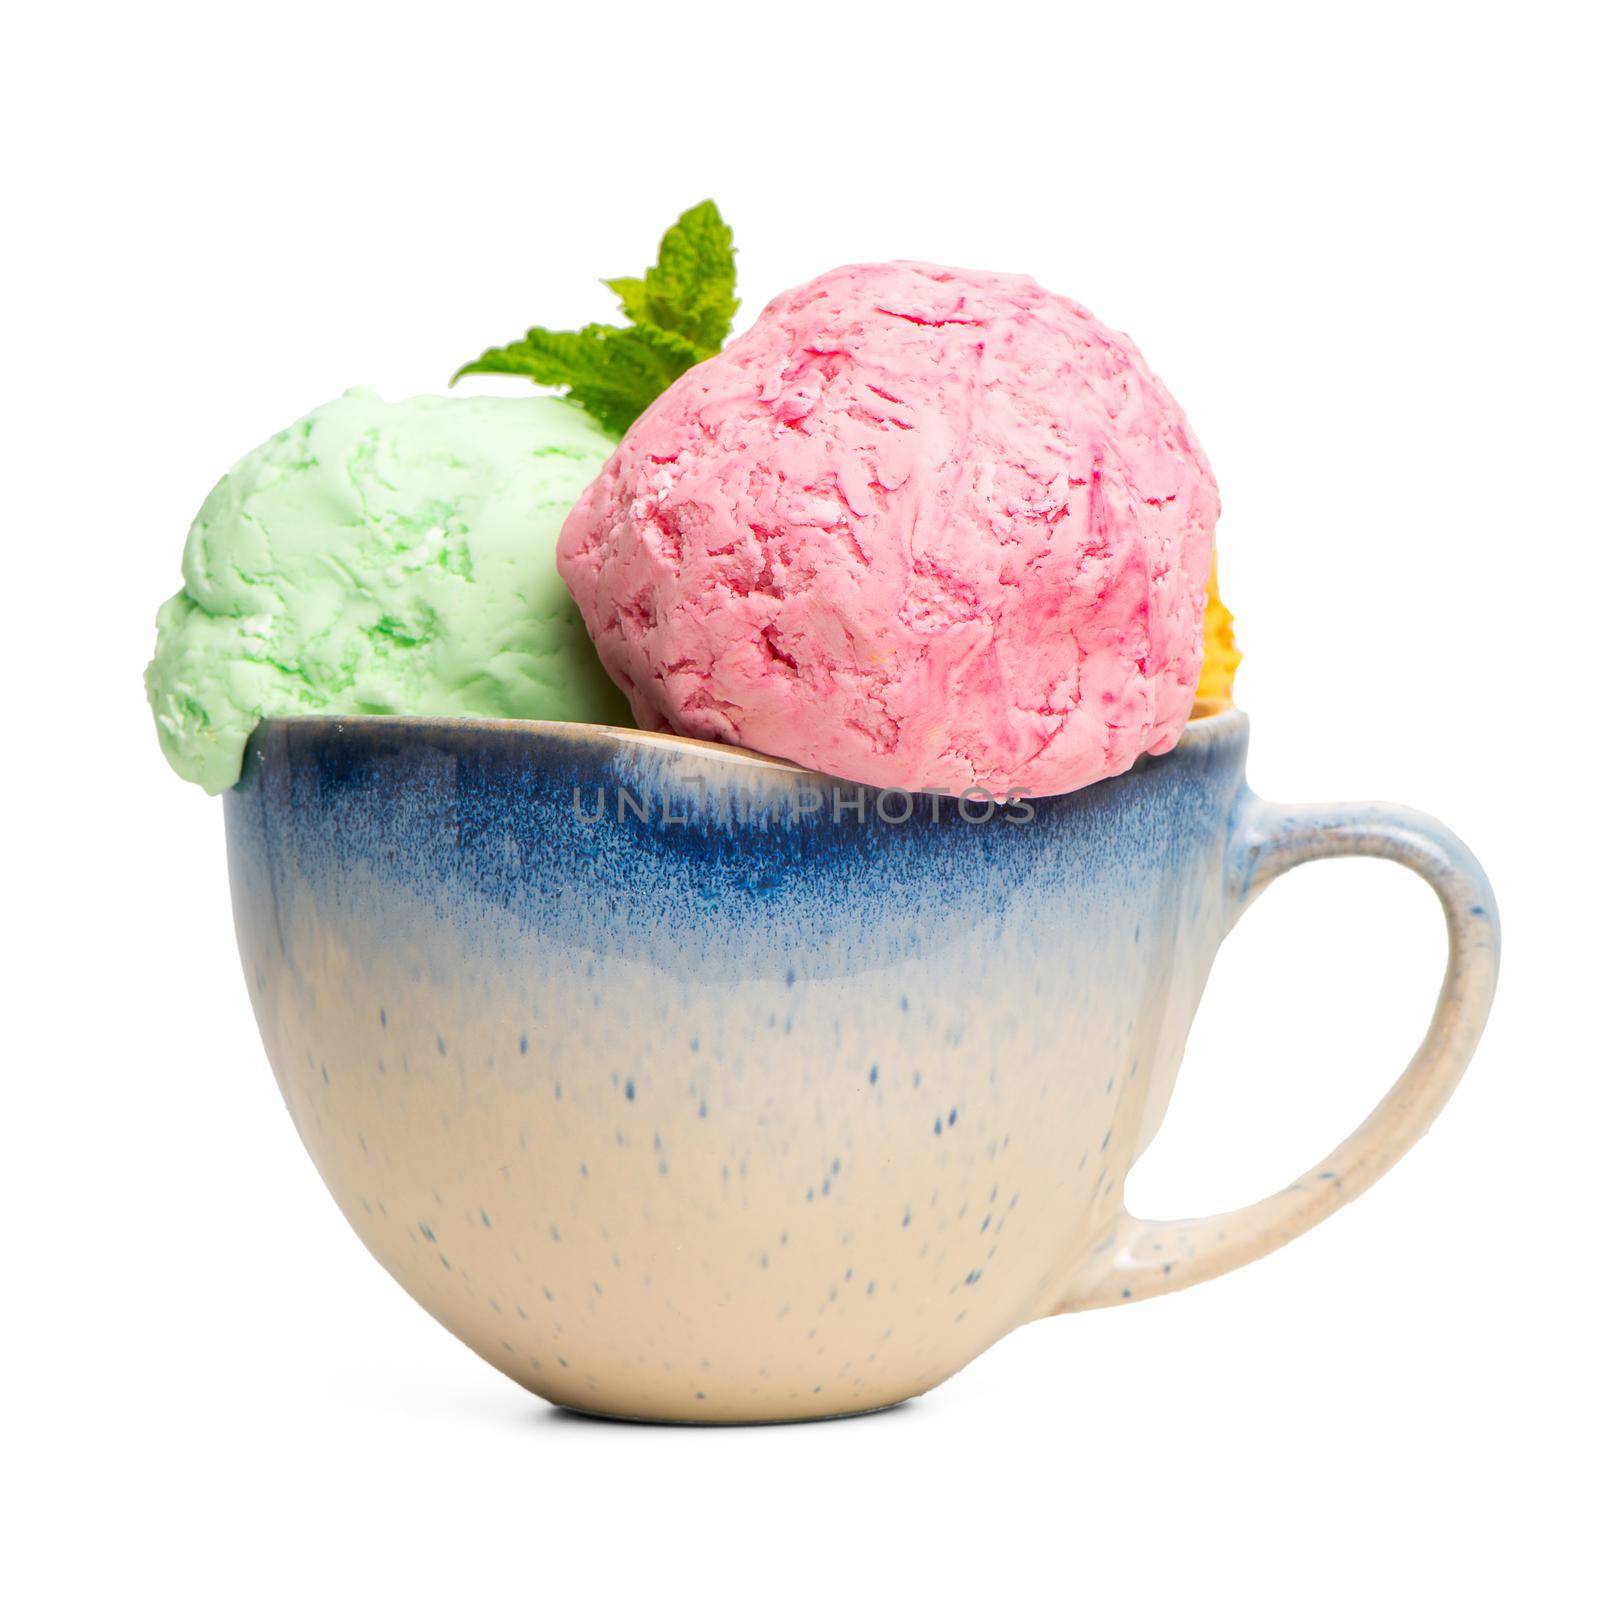 Ceramic bowl of various colorful ice cream balls with mint leaves  isolated on white background. From side view.